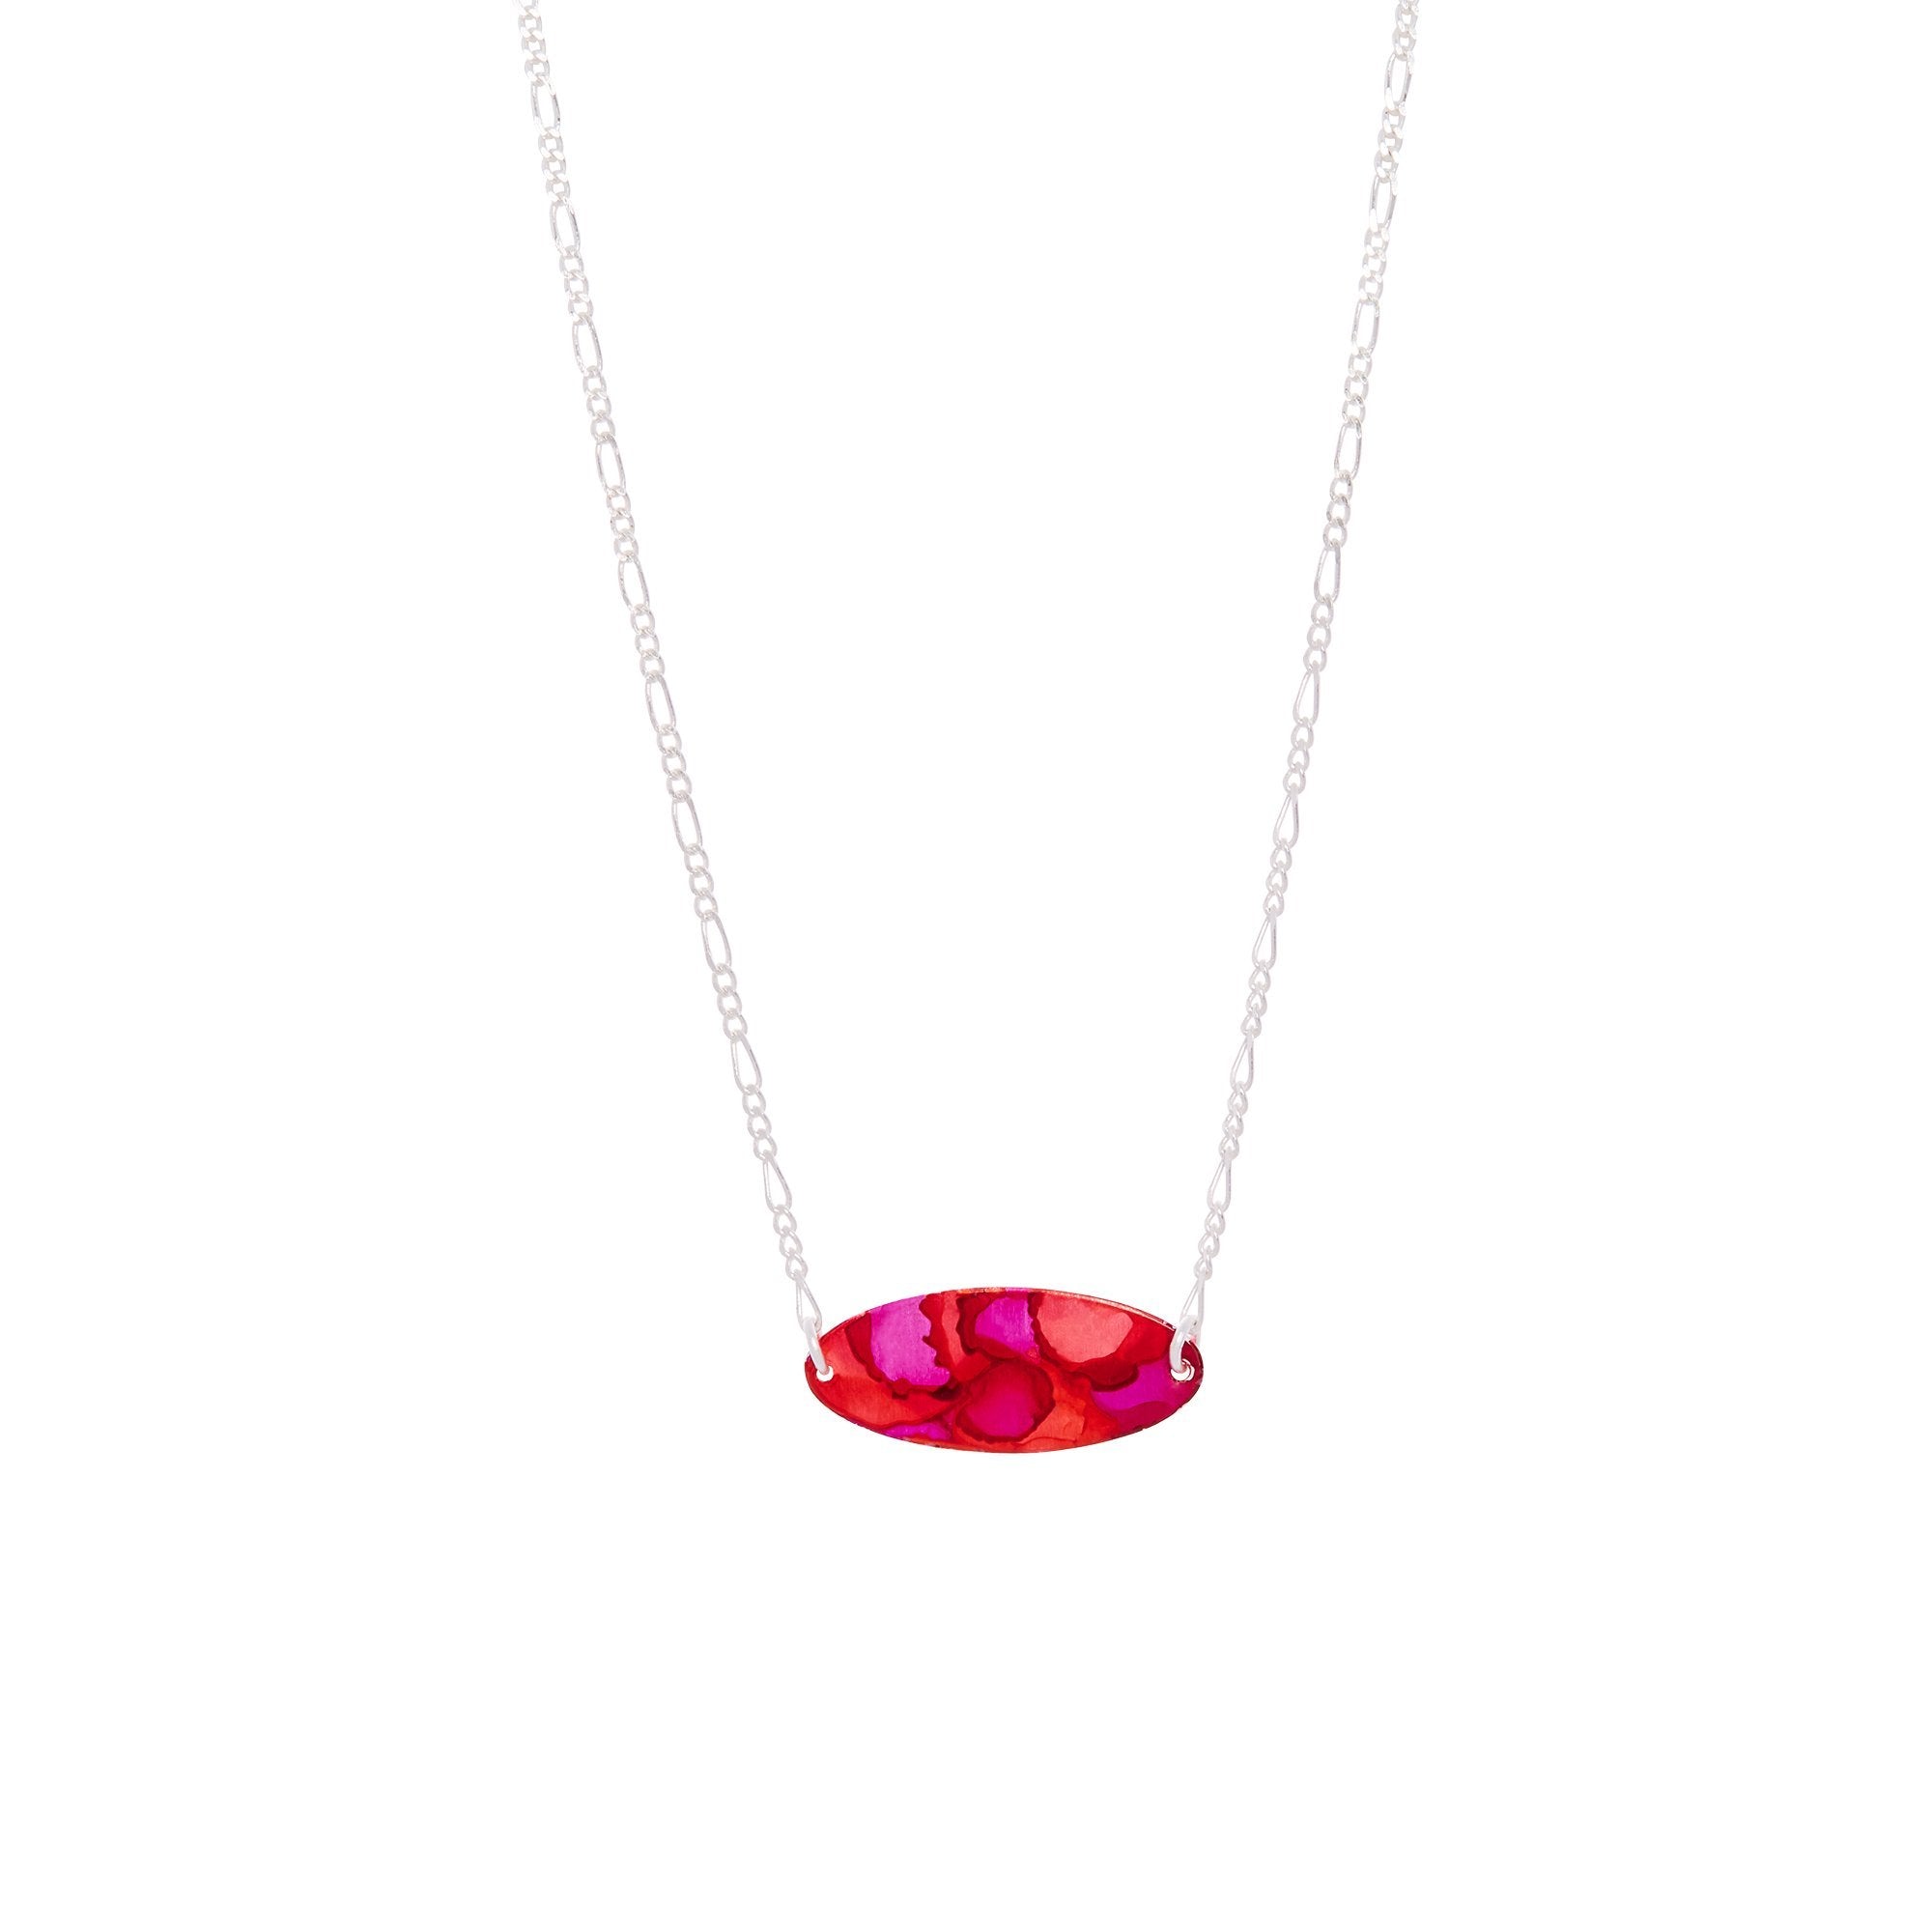 Silver Mini Oval Pendant - Available in More Colors